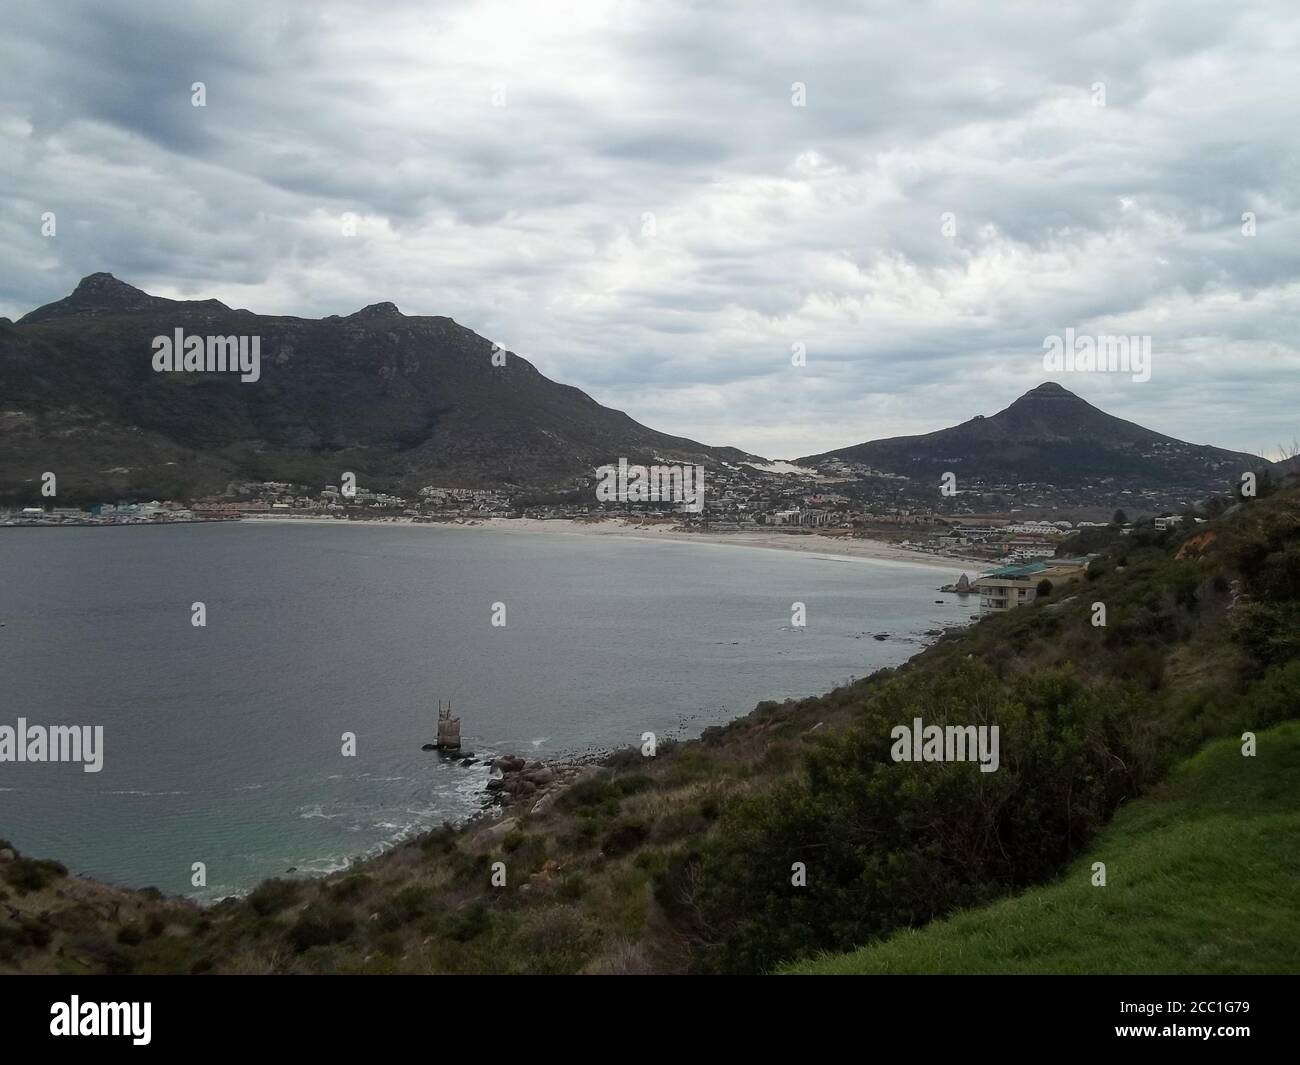 View of mountain and Ocean in Australia. Stock Photo